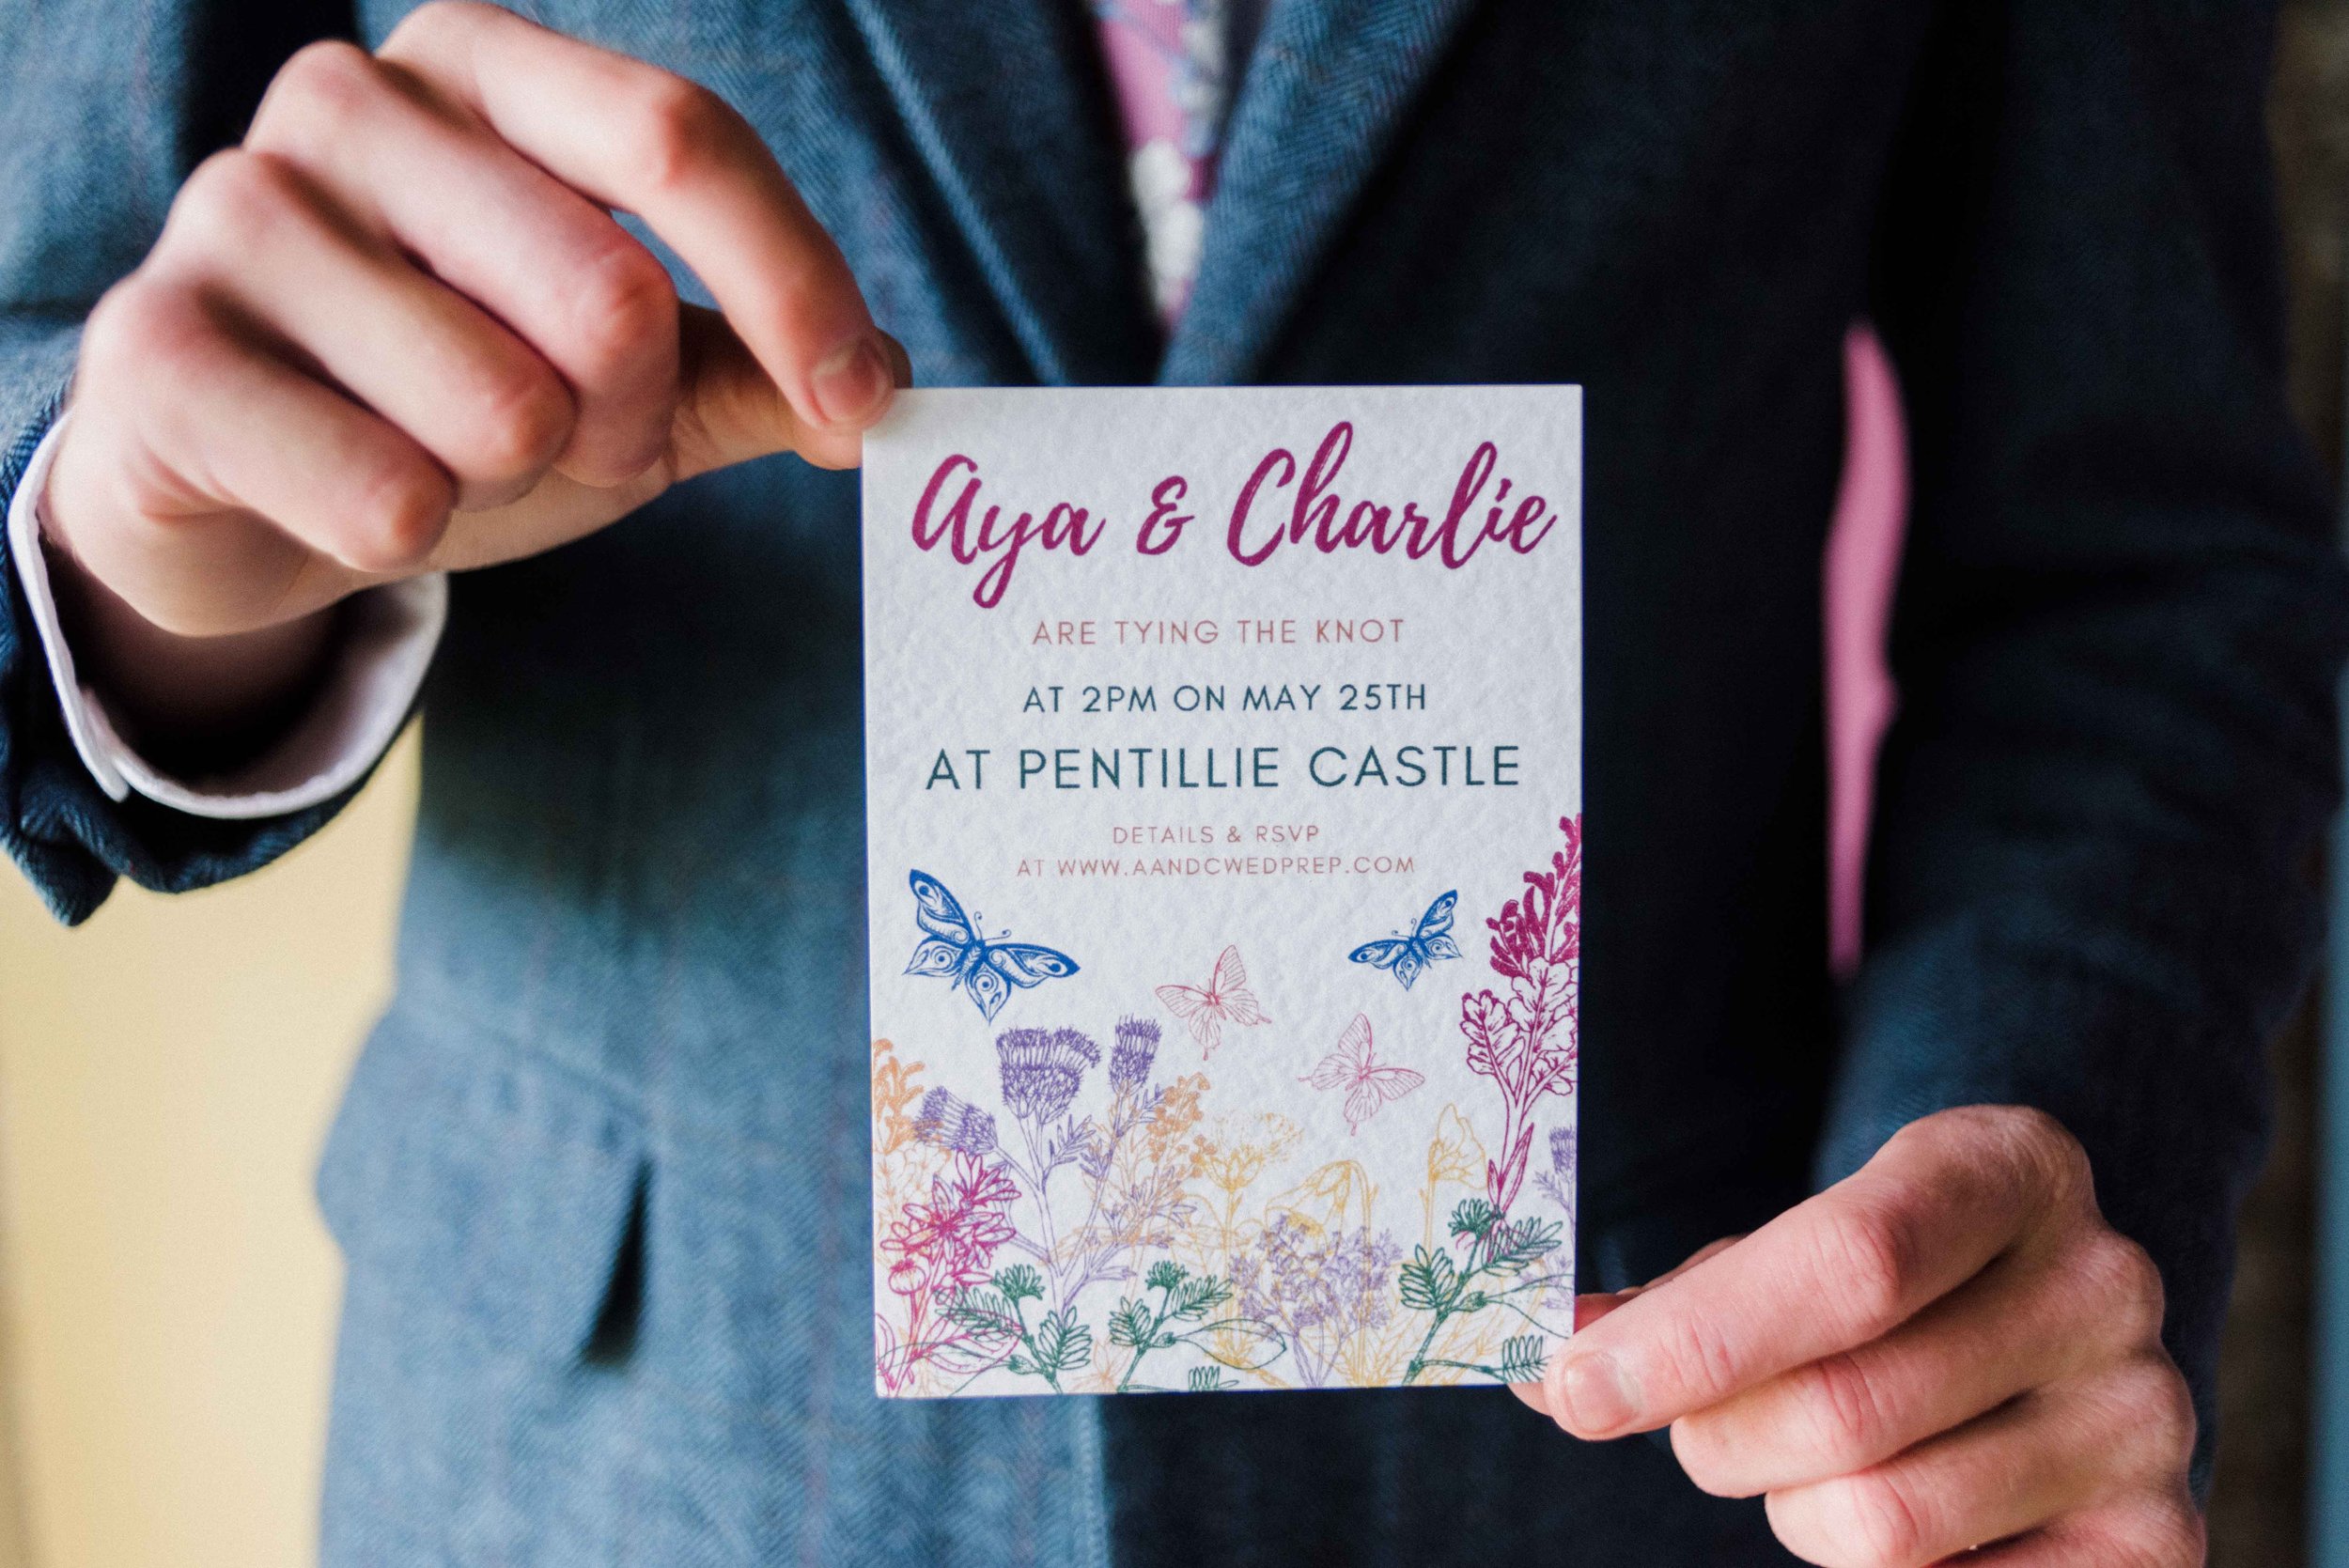 Sustainable wedding stationary photographed by Liberty Pearl for a styled shoot at Pentillie Castle.jpg